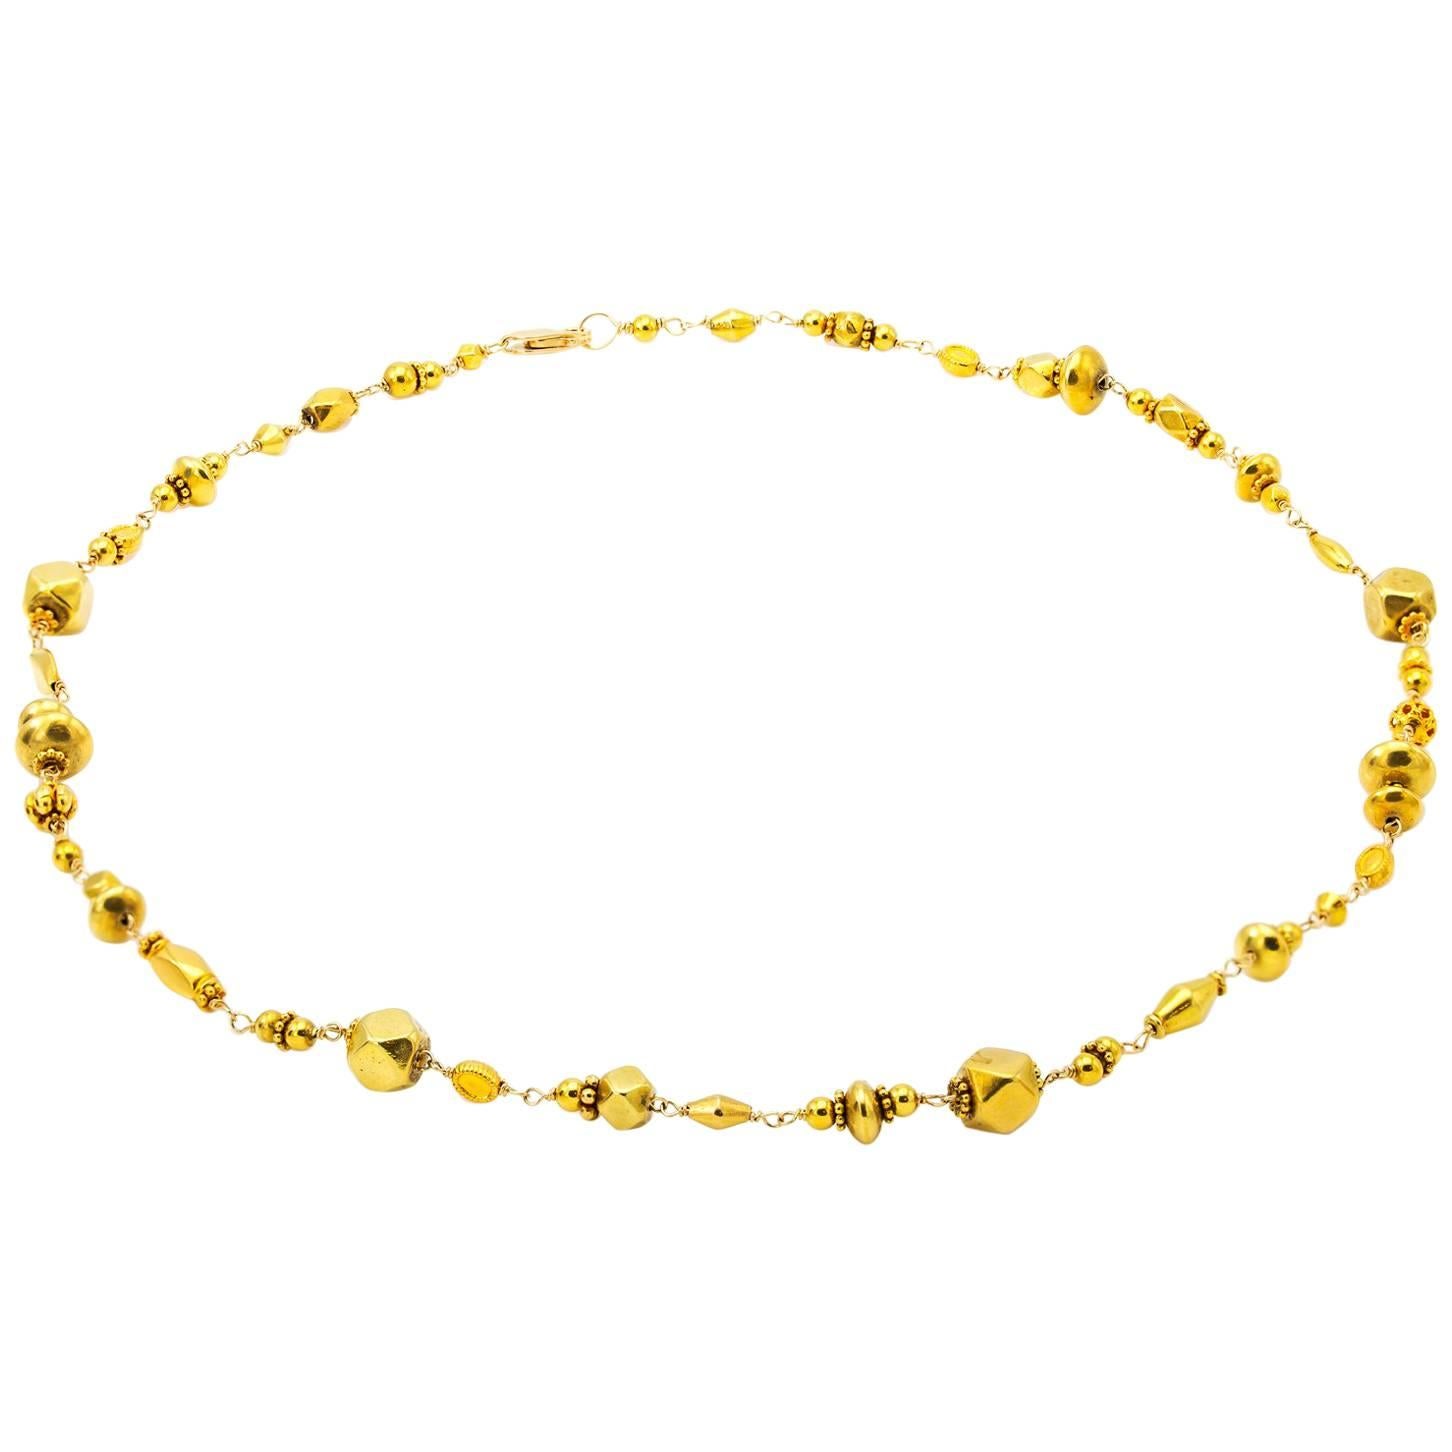 18k Gold Bead Necklace in Various Shapes and Geometrical Designs